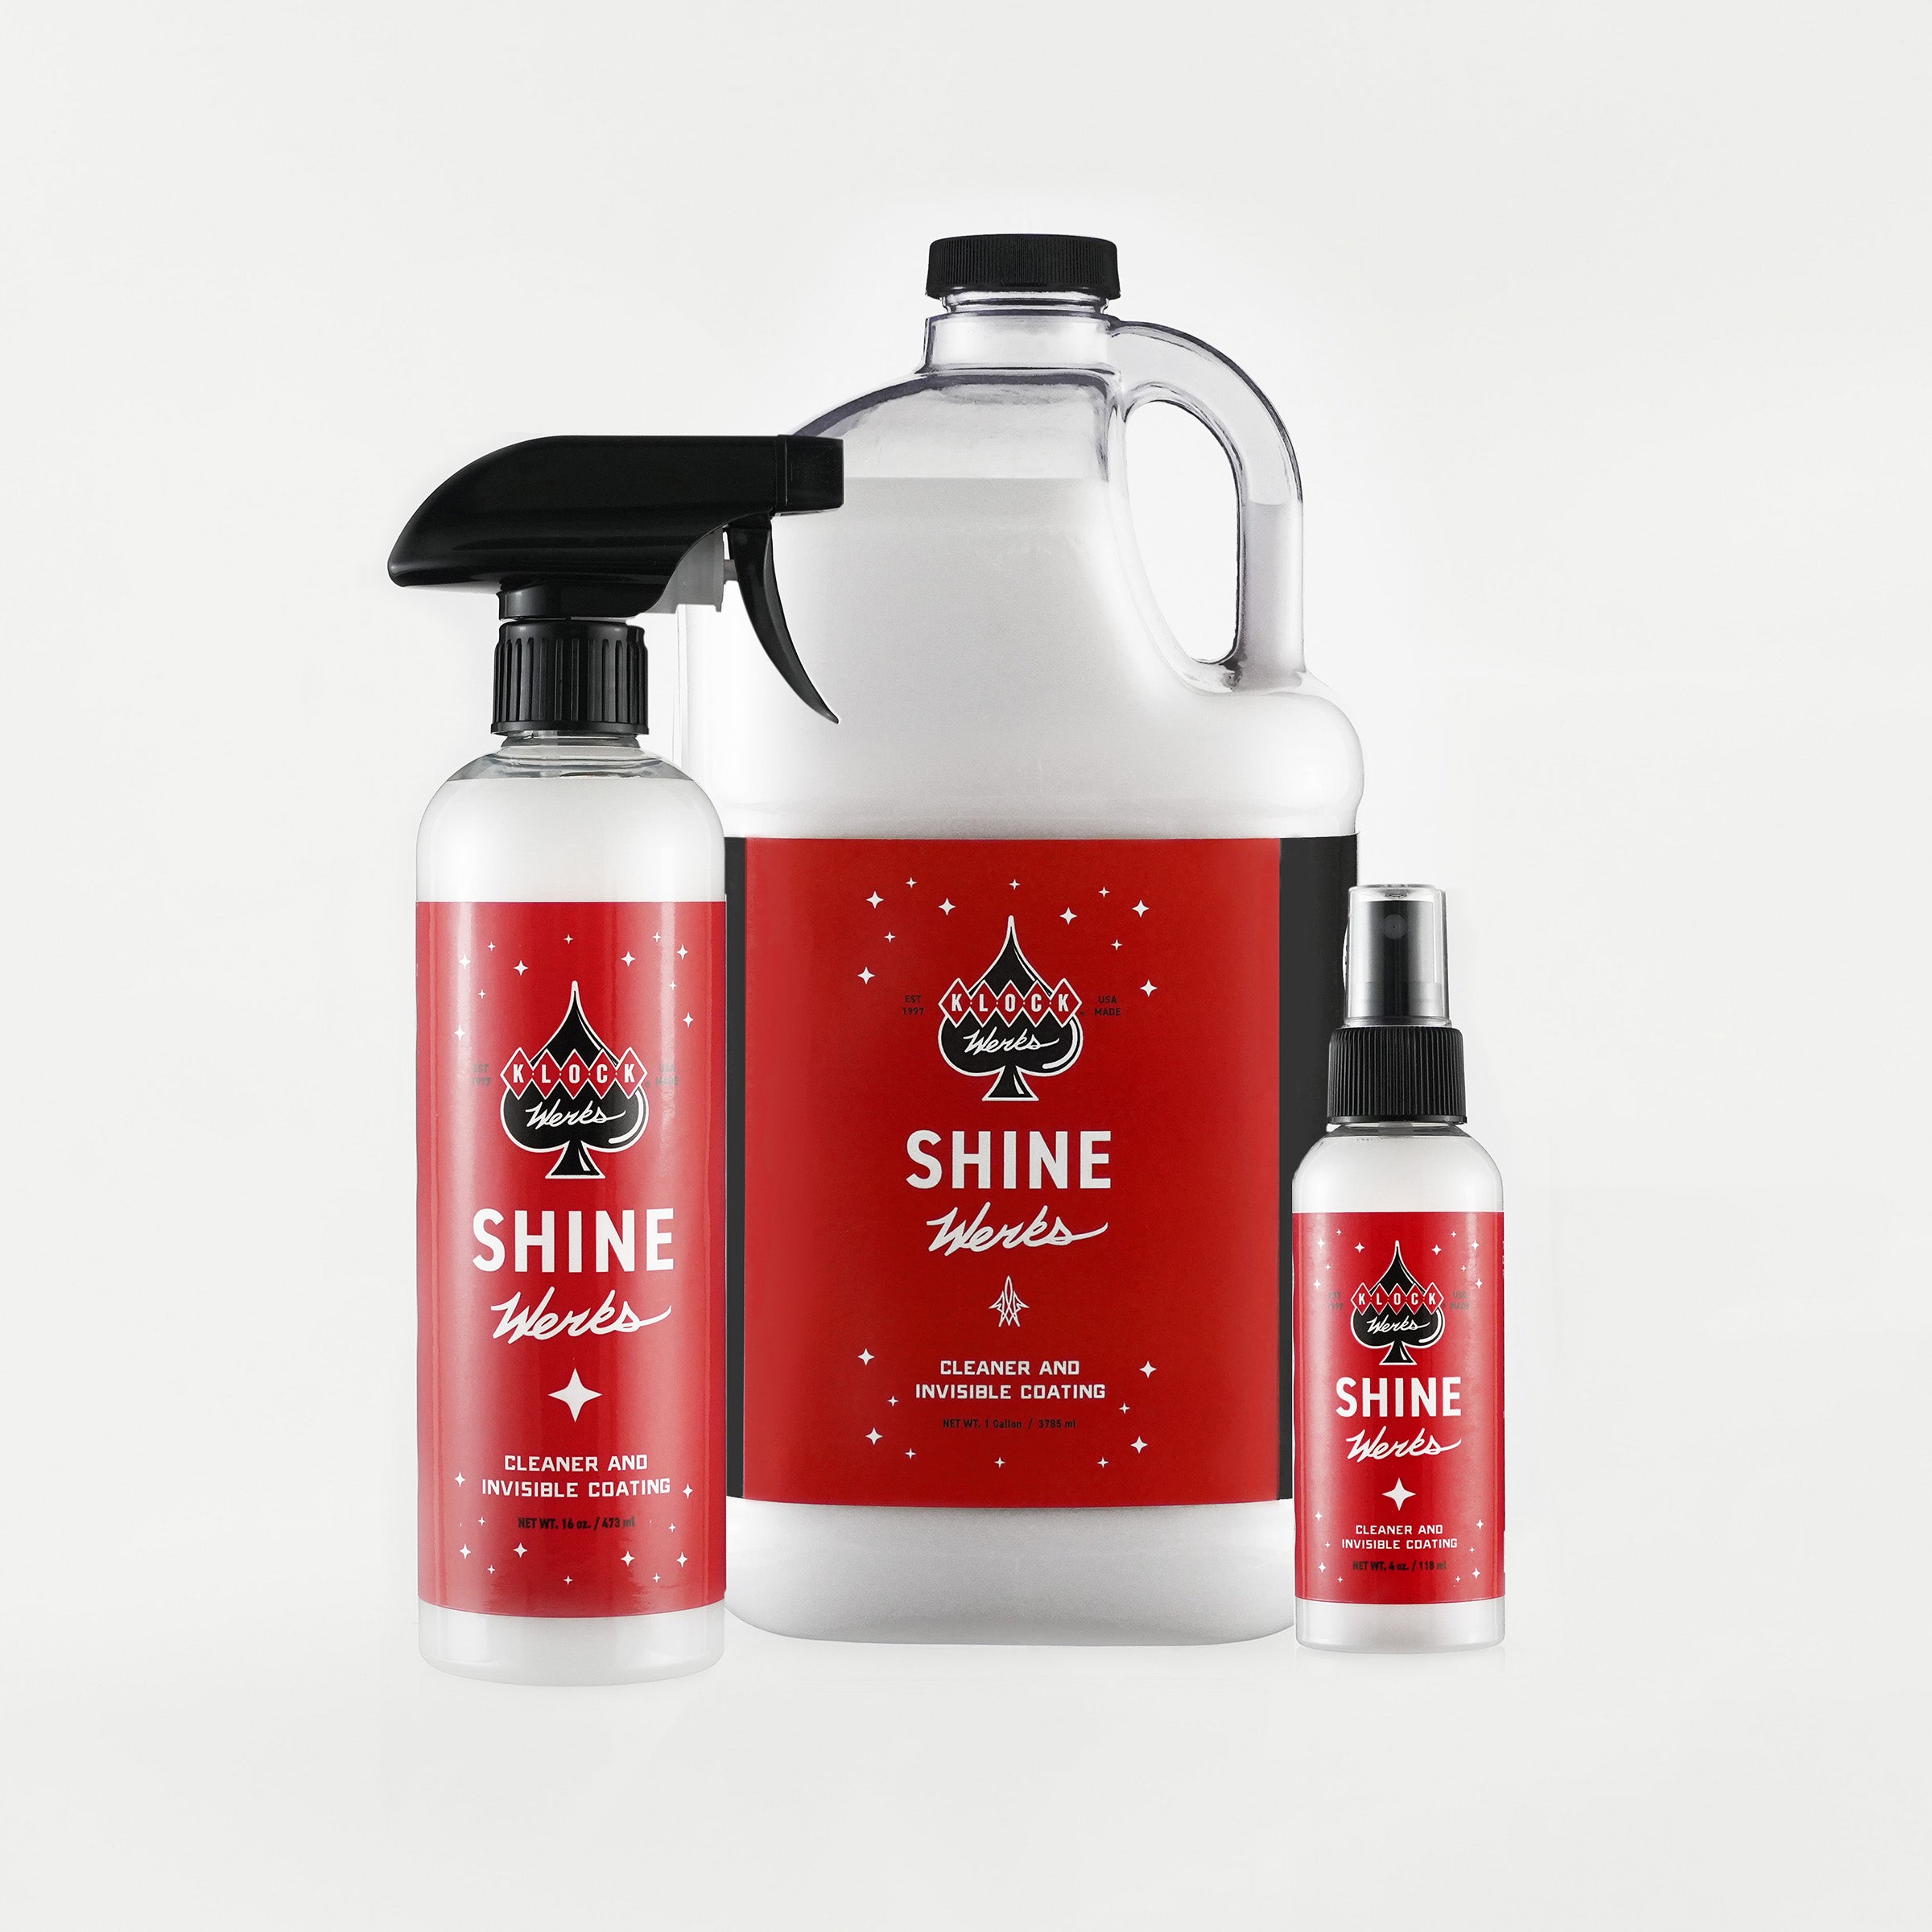 Shine Werks cleaning products complete lineup(The Complete Shine Werks Lineup)